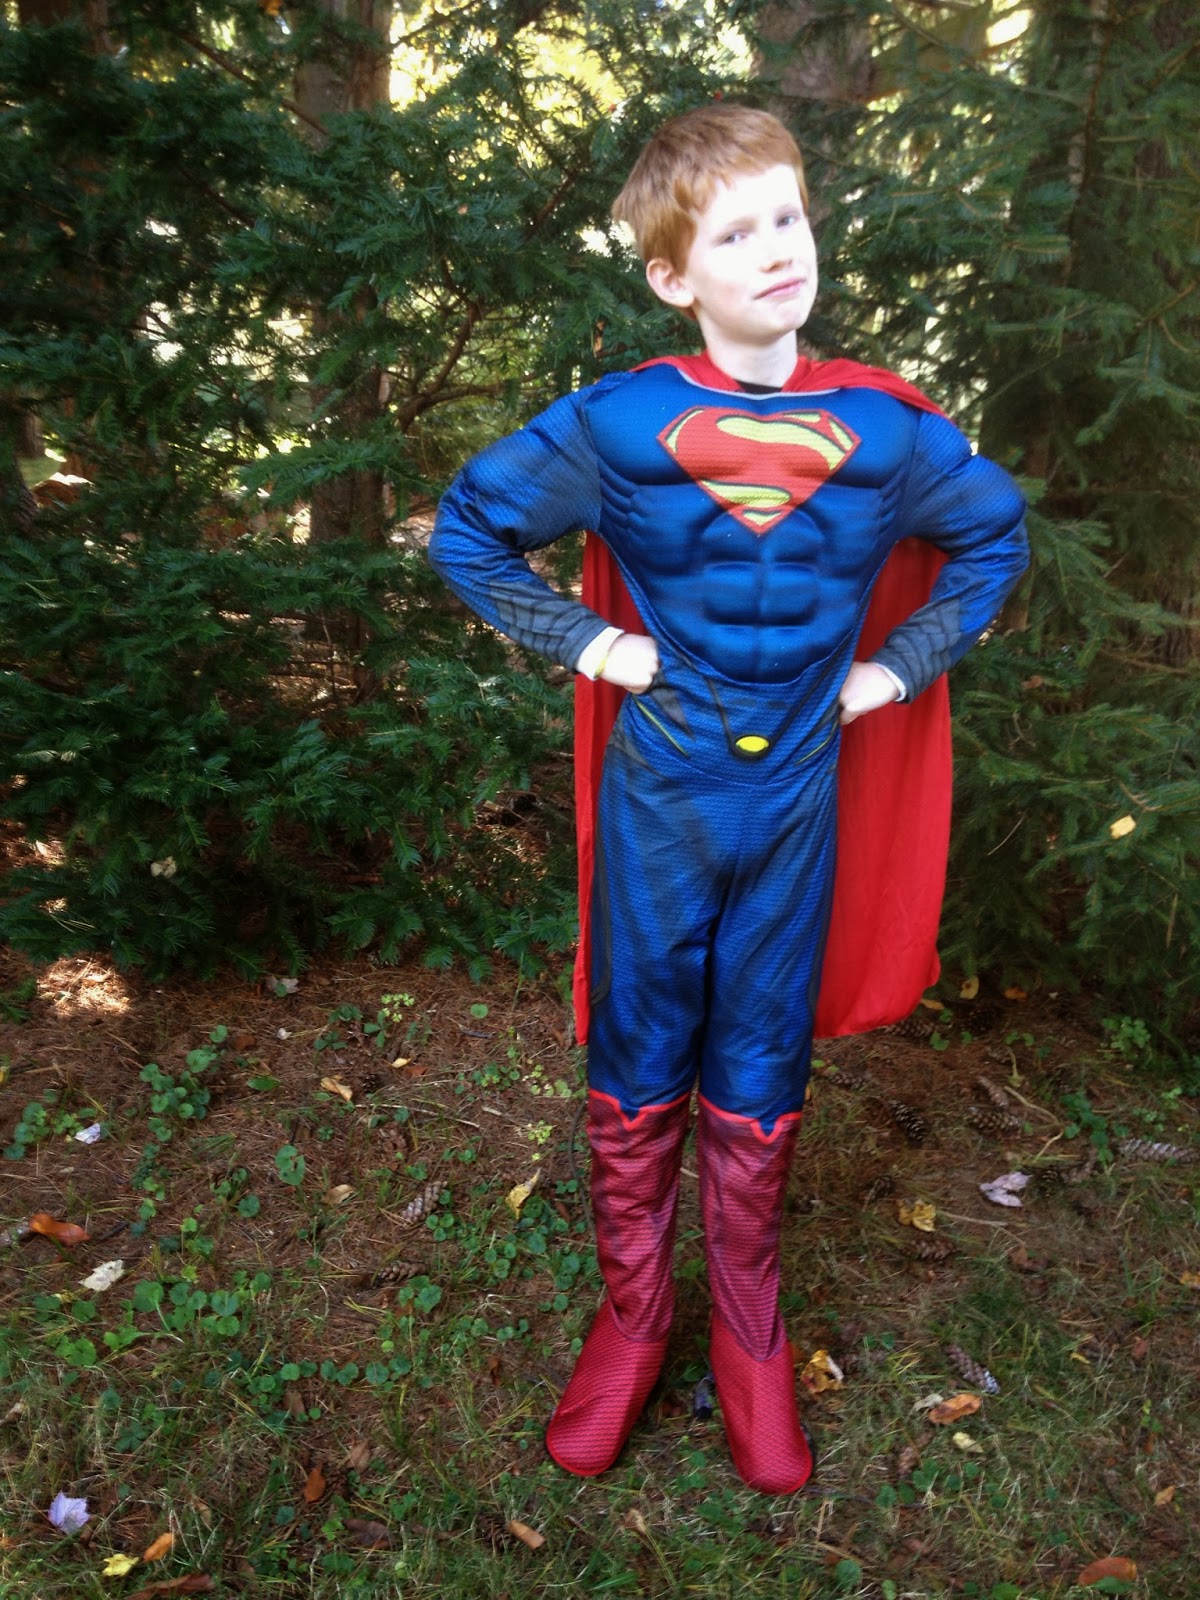 be blessed!: Review: Superman Costumes at Costume Discounters